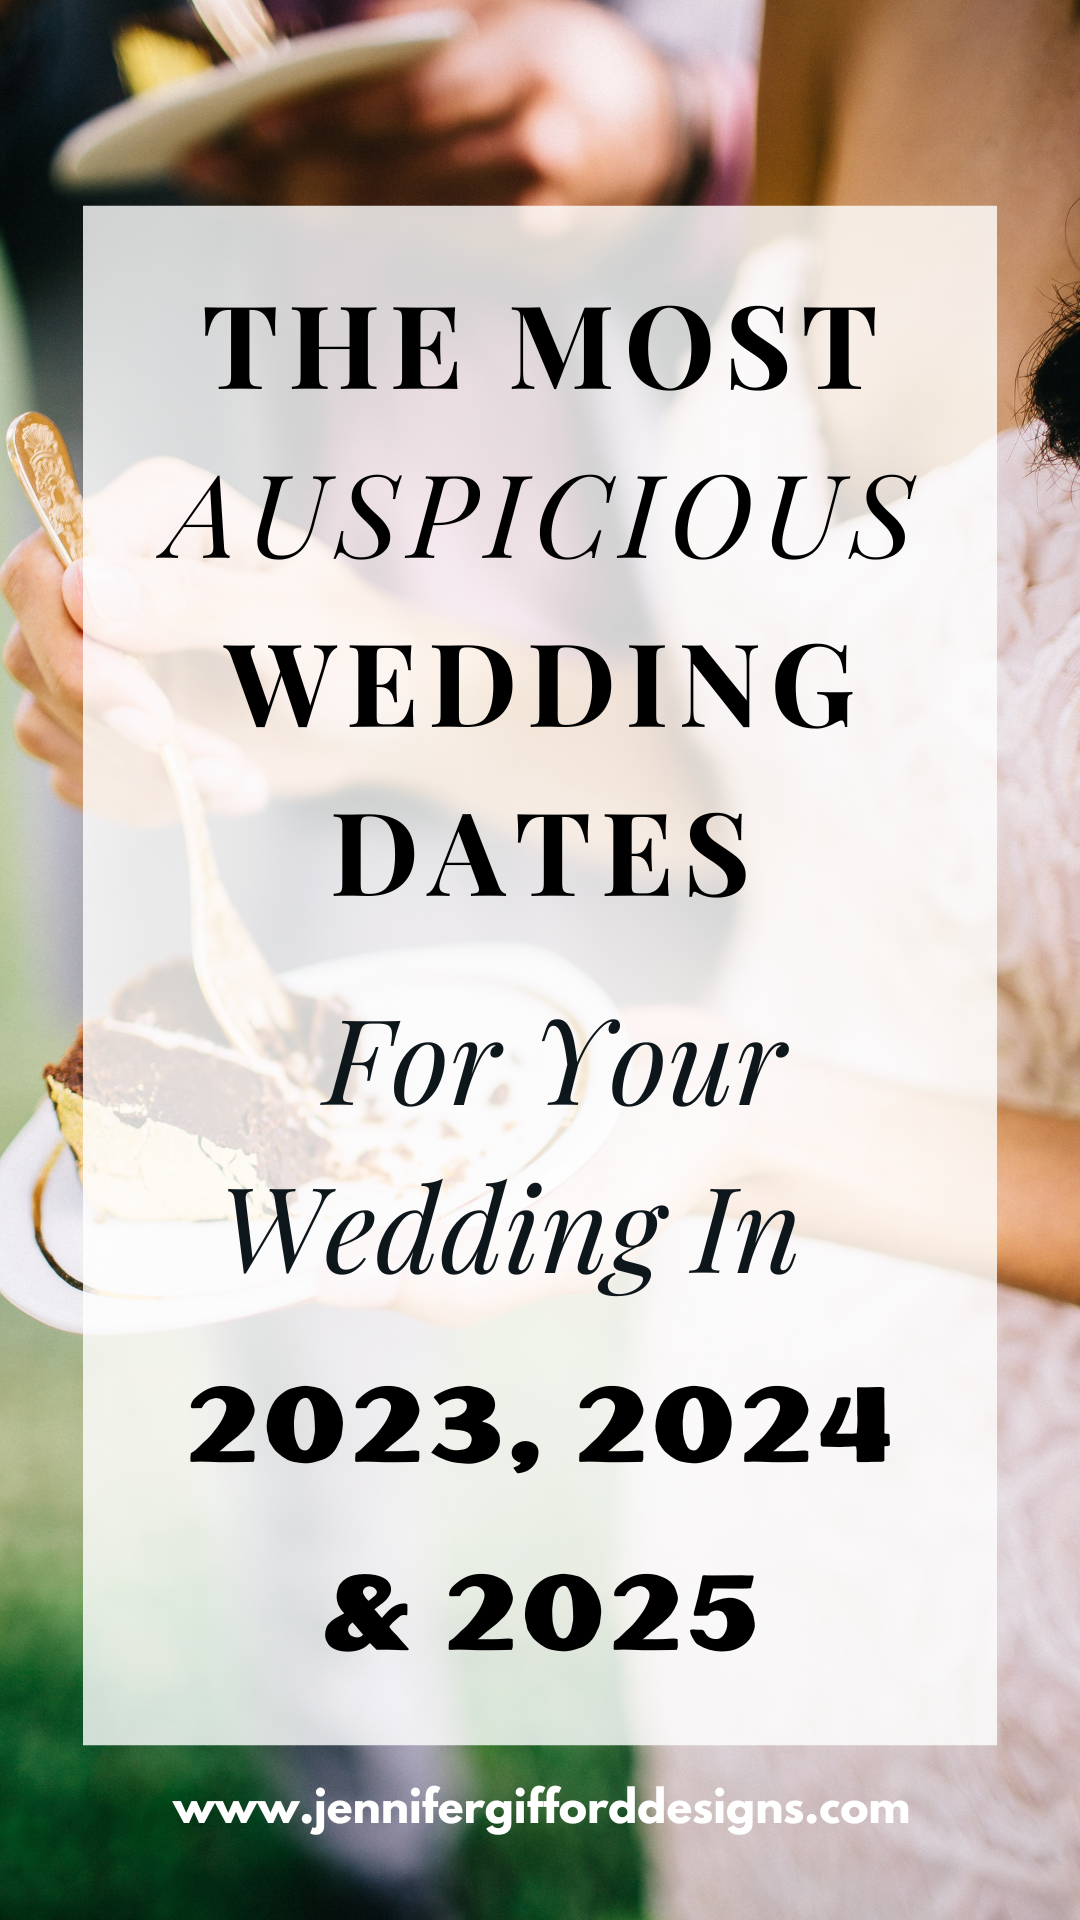 How to Use Numerology to Find the Best Wedding Date for You